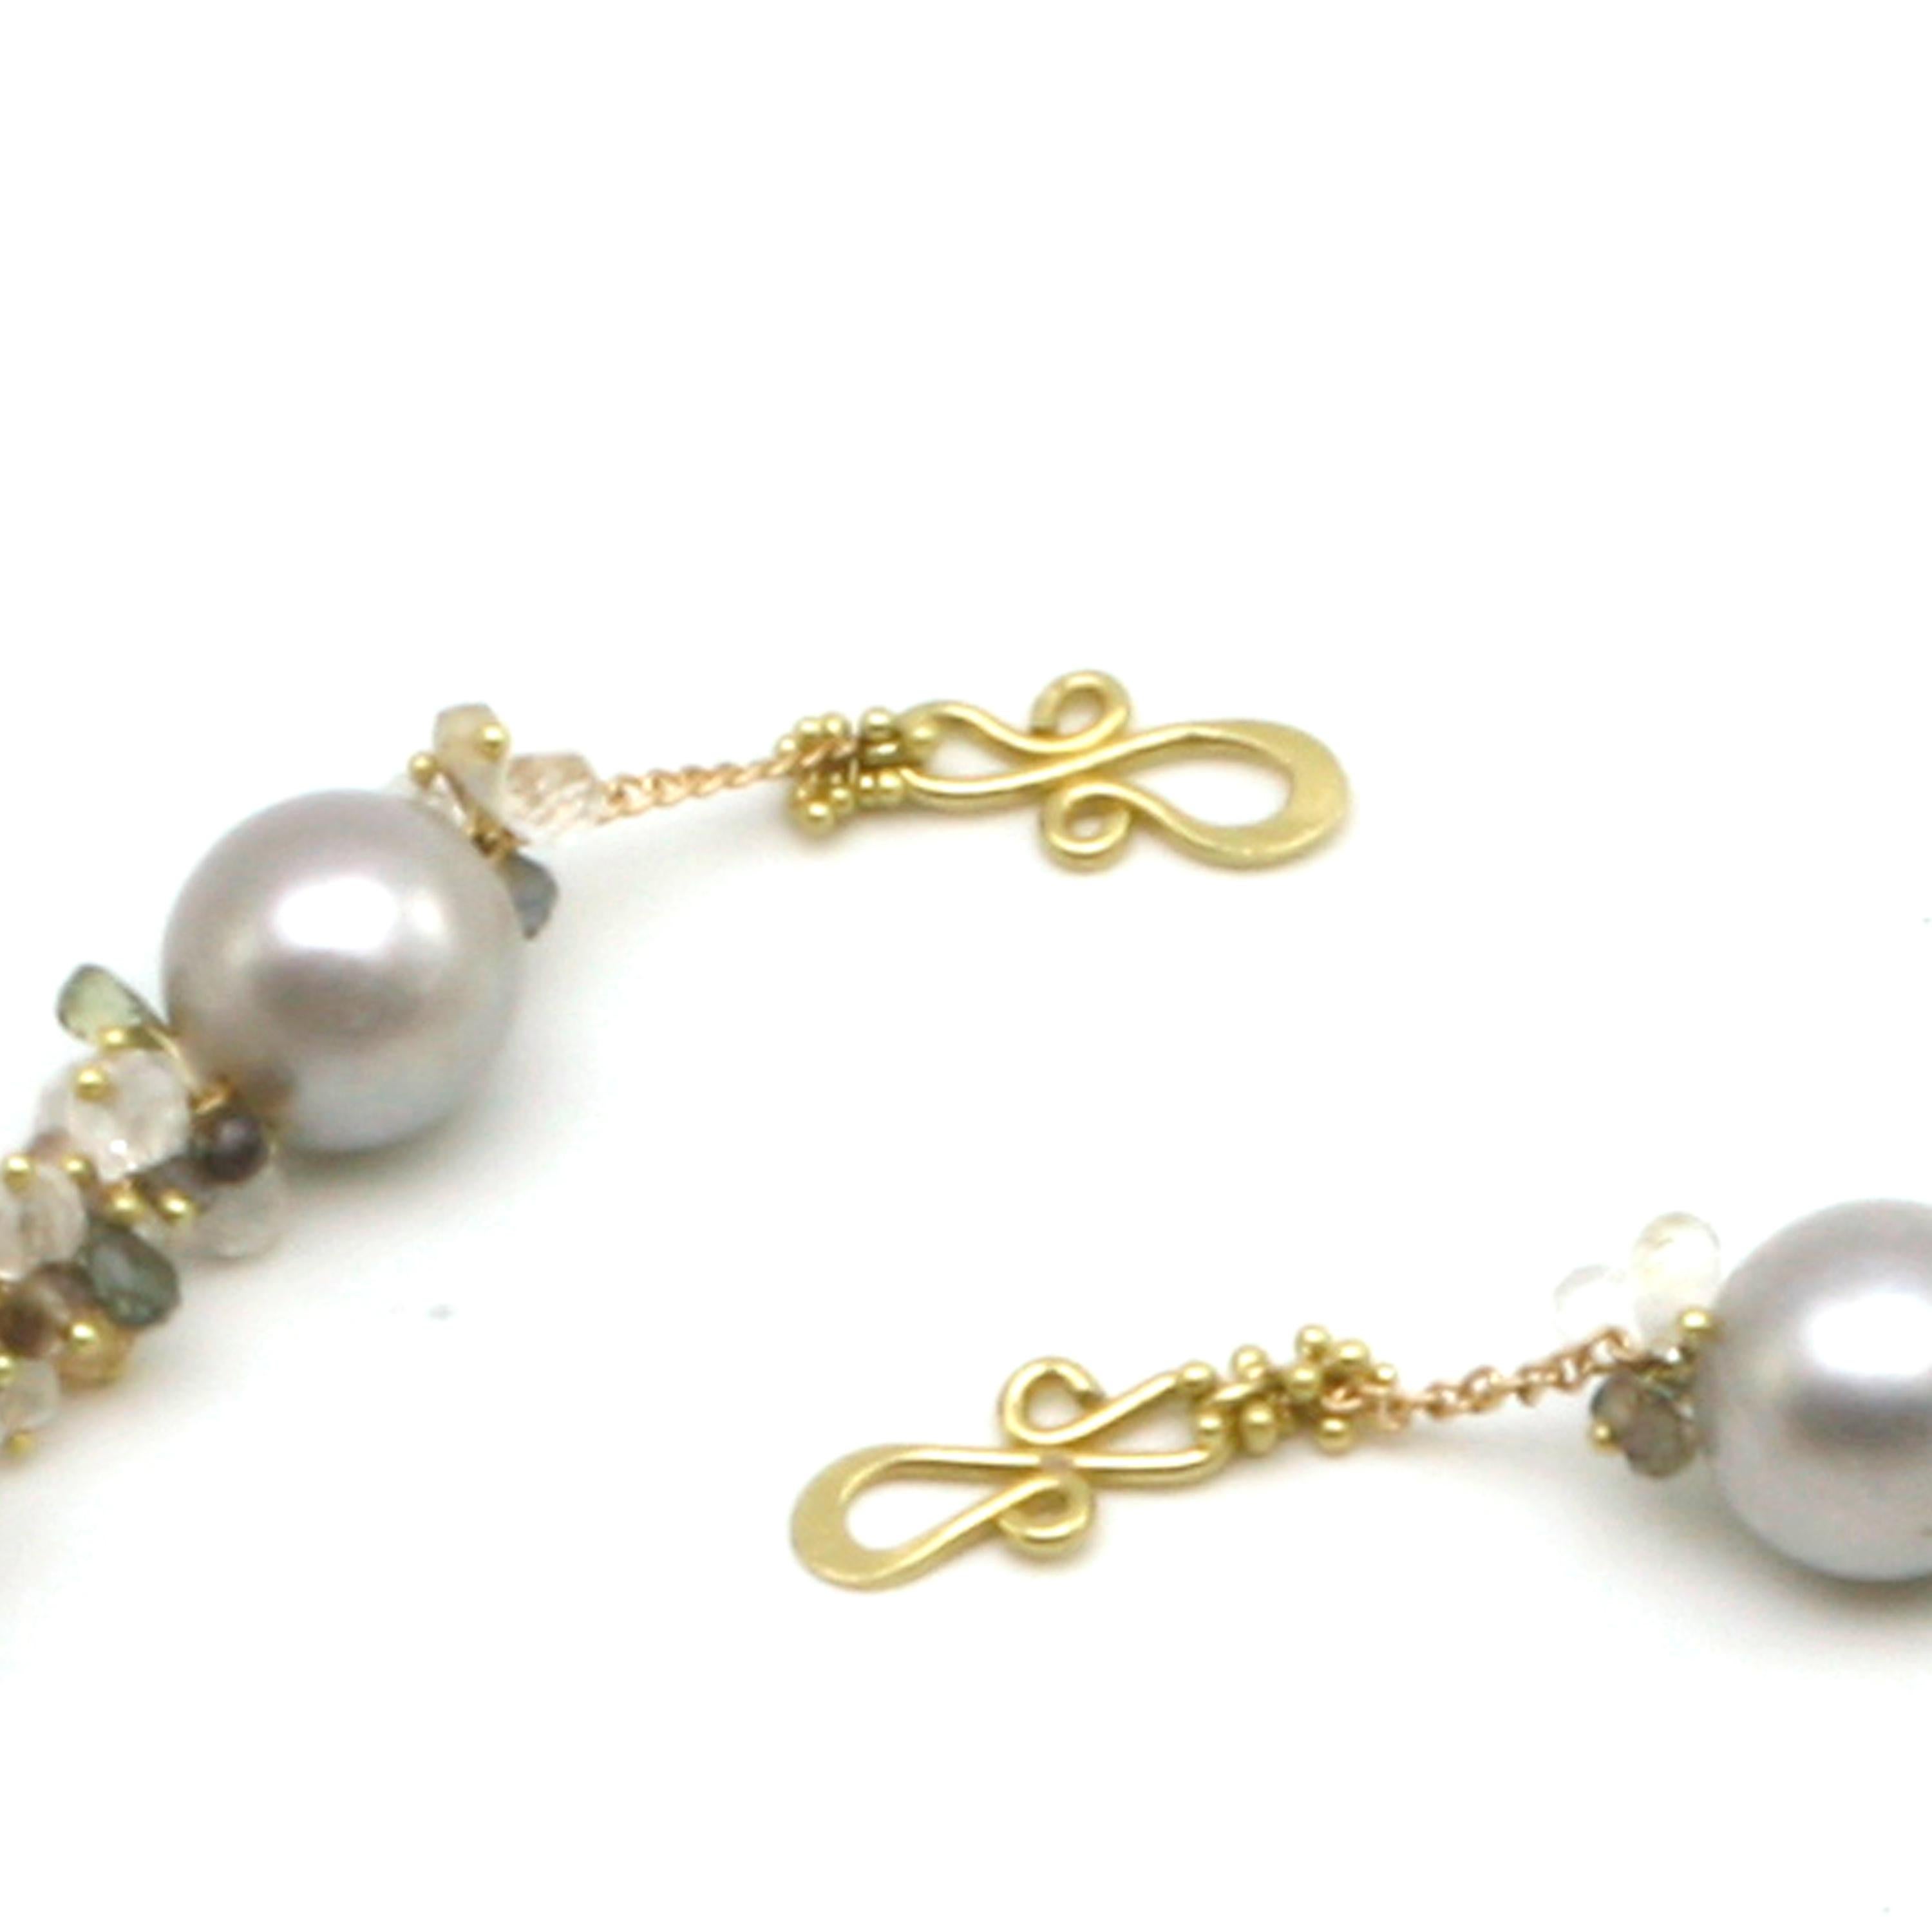 Pearl Necklace with Grey Pearls, Faceted Gemstone Beads in 18k Diana Kim England For Sale 1